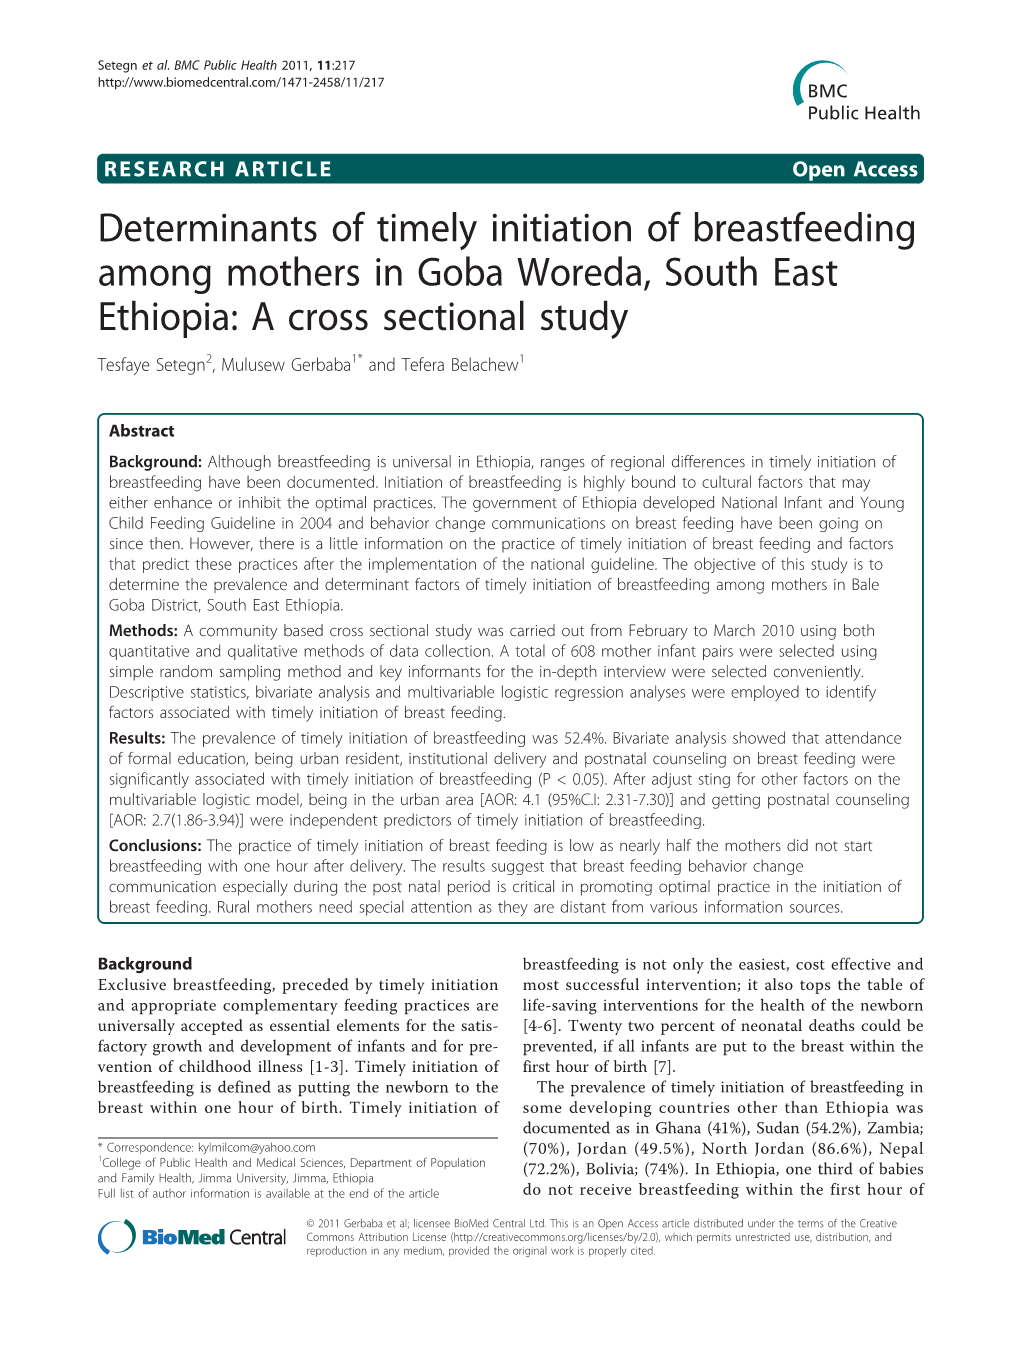 Determinants of Timely Initiation of Breastfeeding Among Mothers In